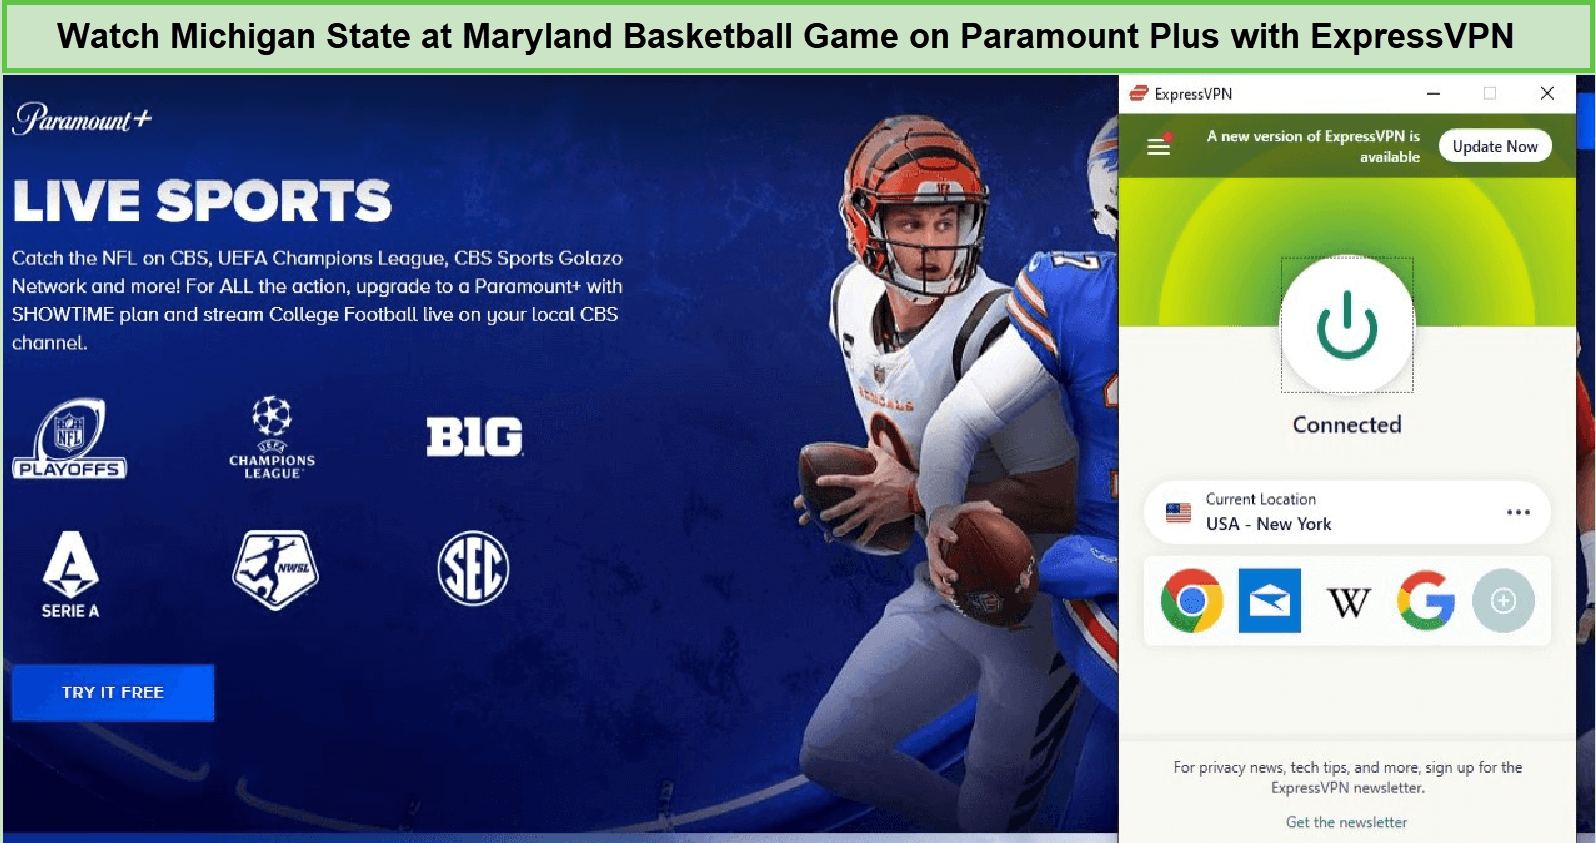 Watch-Michigan-State-at-Maryland-Basketball-Game-in-India-on-Paramount-Plus-with-ExpressVPN